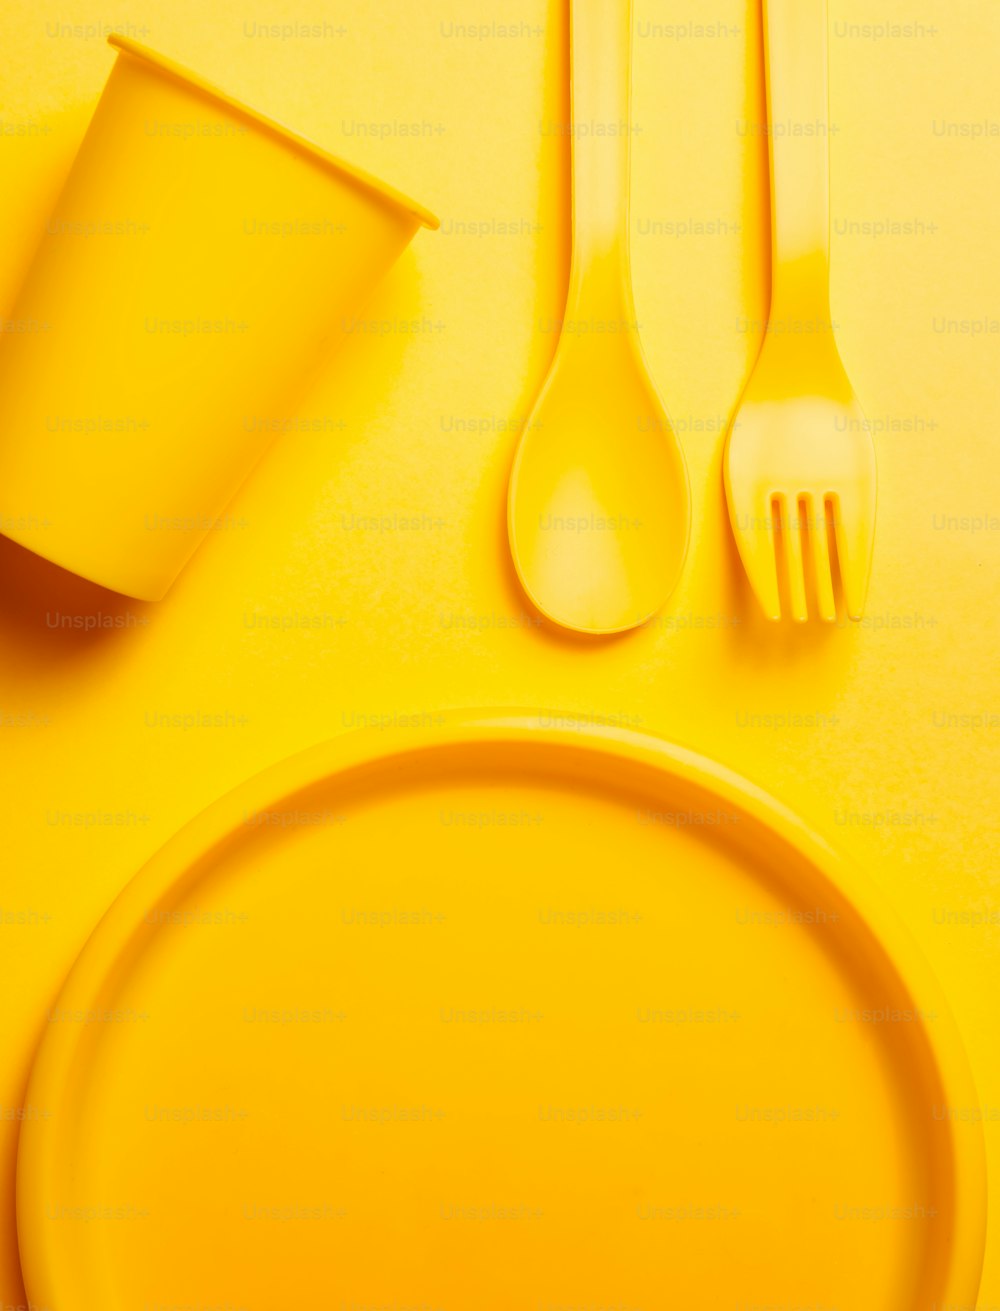 a yellow table setting with utensils and a cup